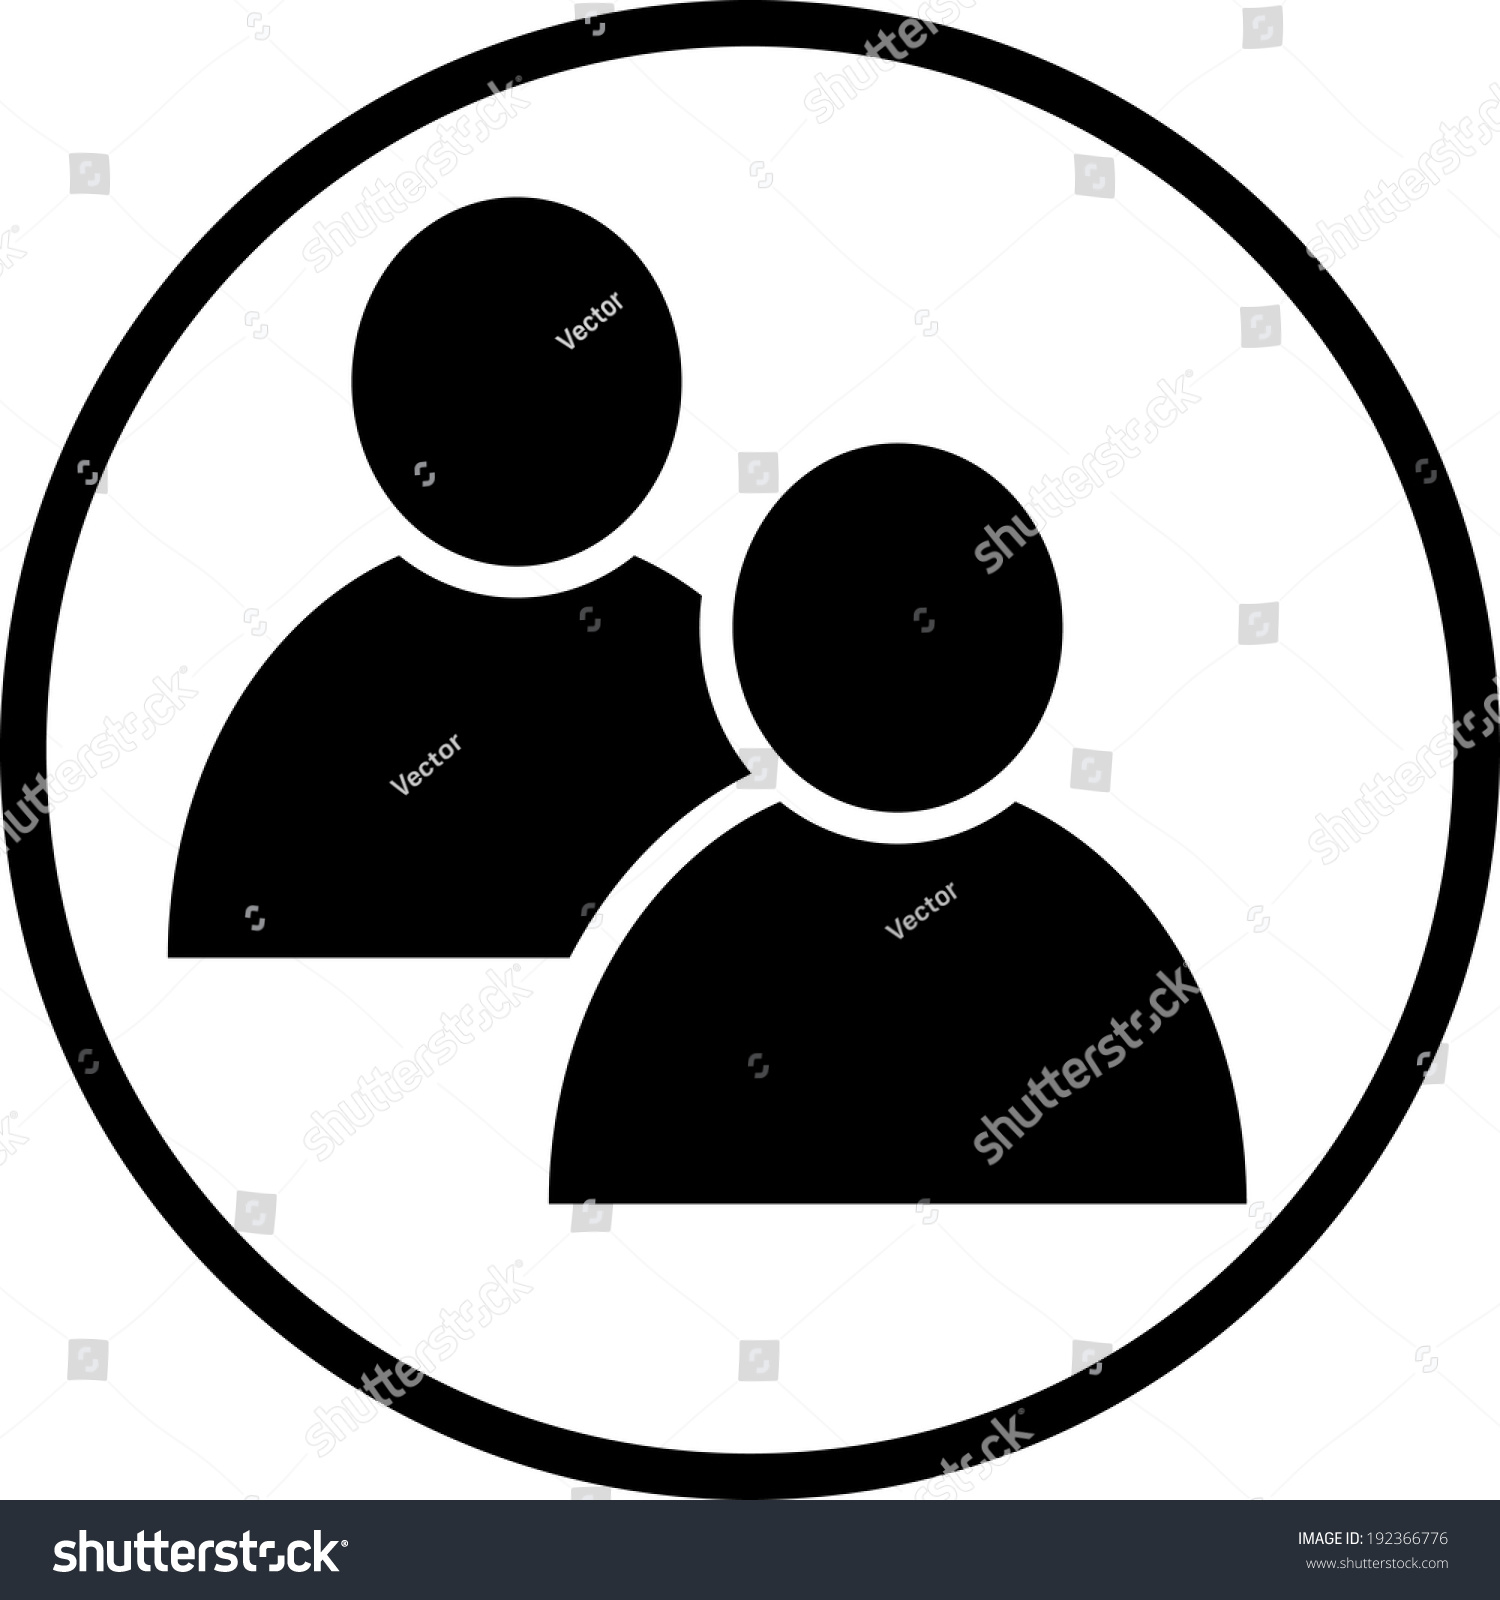 Two People Vector Icon Stock Vector 192366776 - Shutterstock